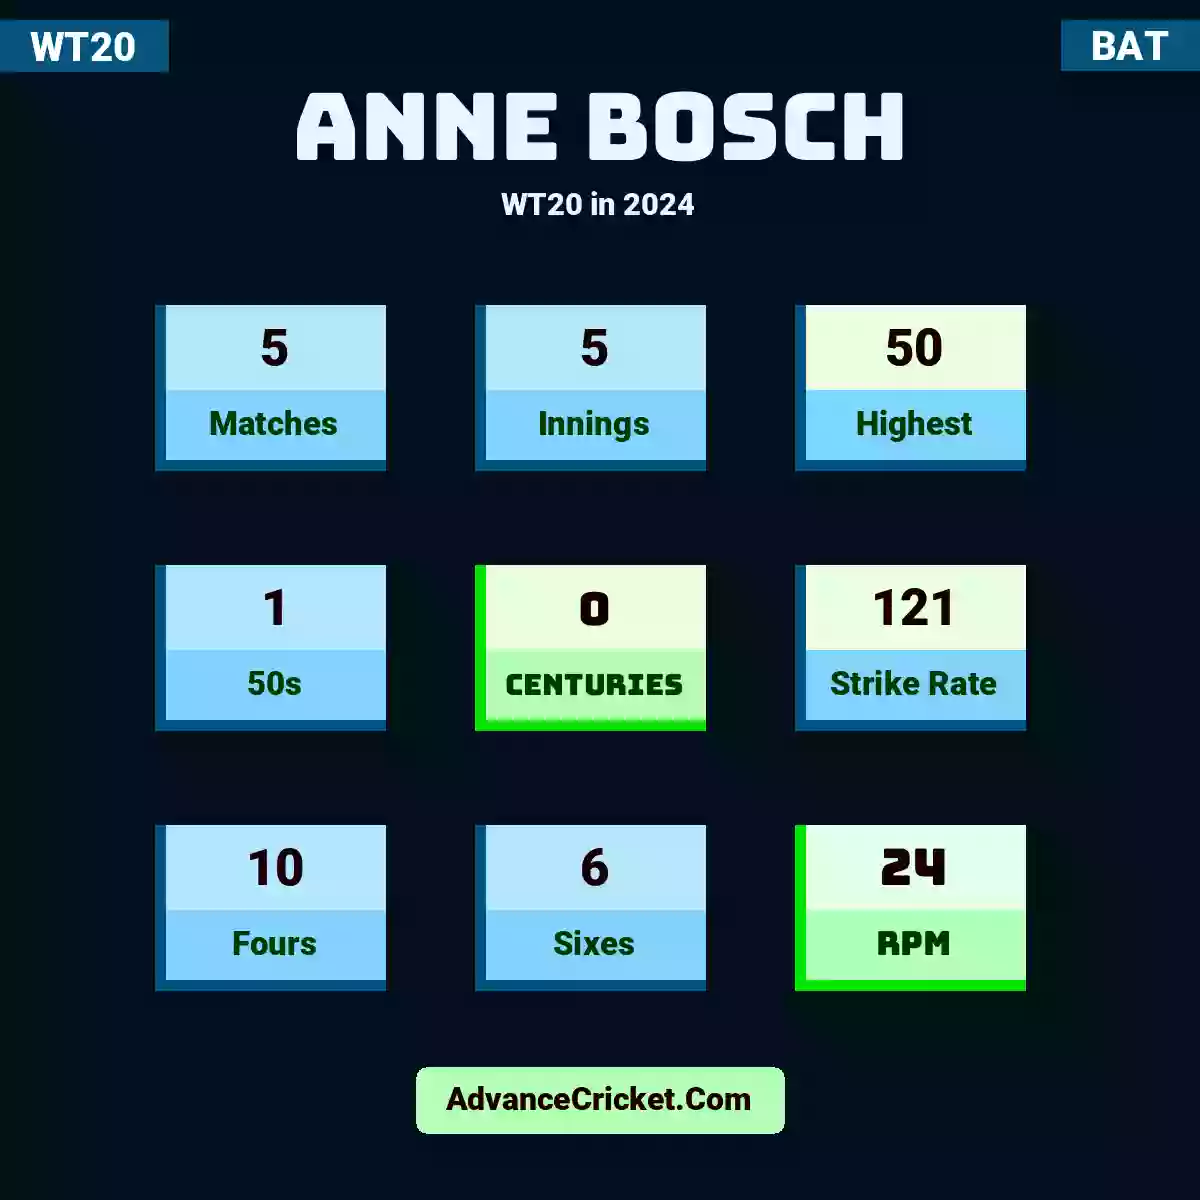 Anne Bosch WT20  in 2024, Anne Bosch played 5 matches, scored 50 runs as highest, 1 half-centuries, and 0 centuries, with a strike rate of 121. A.Bosch hit 10 fours and 6 sixes, with an RPM of 24.